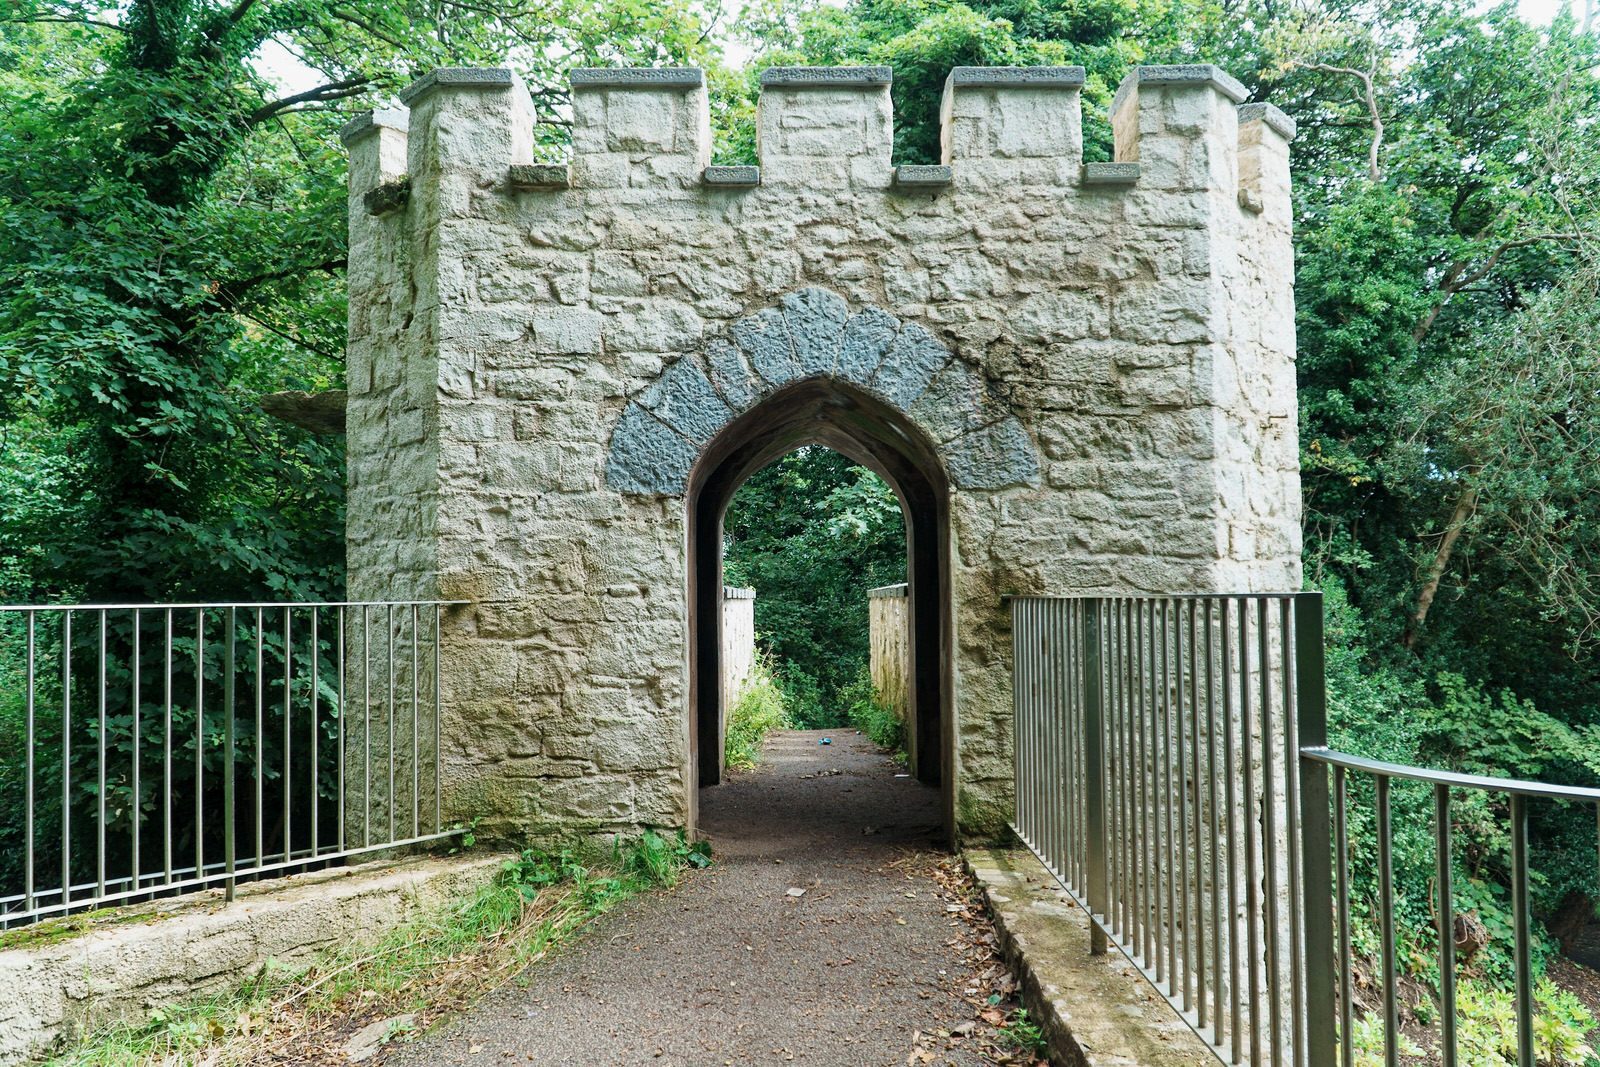 THE ANNIE LEE BRIDGE HAS BEEN RESTORED [THE OLDEST FOLLY IN ST ANNE'S PARK] 011